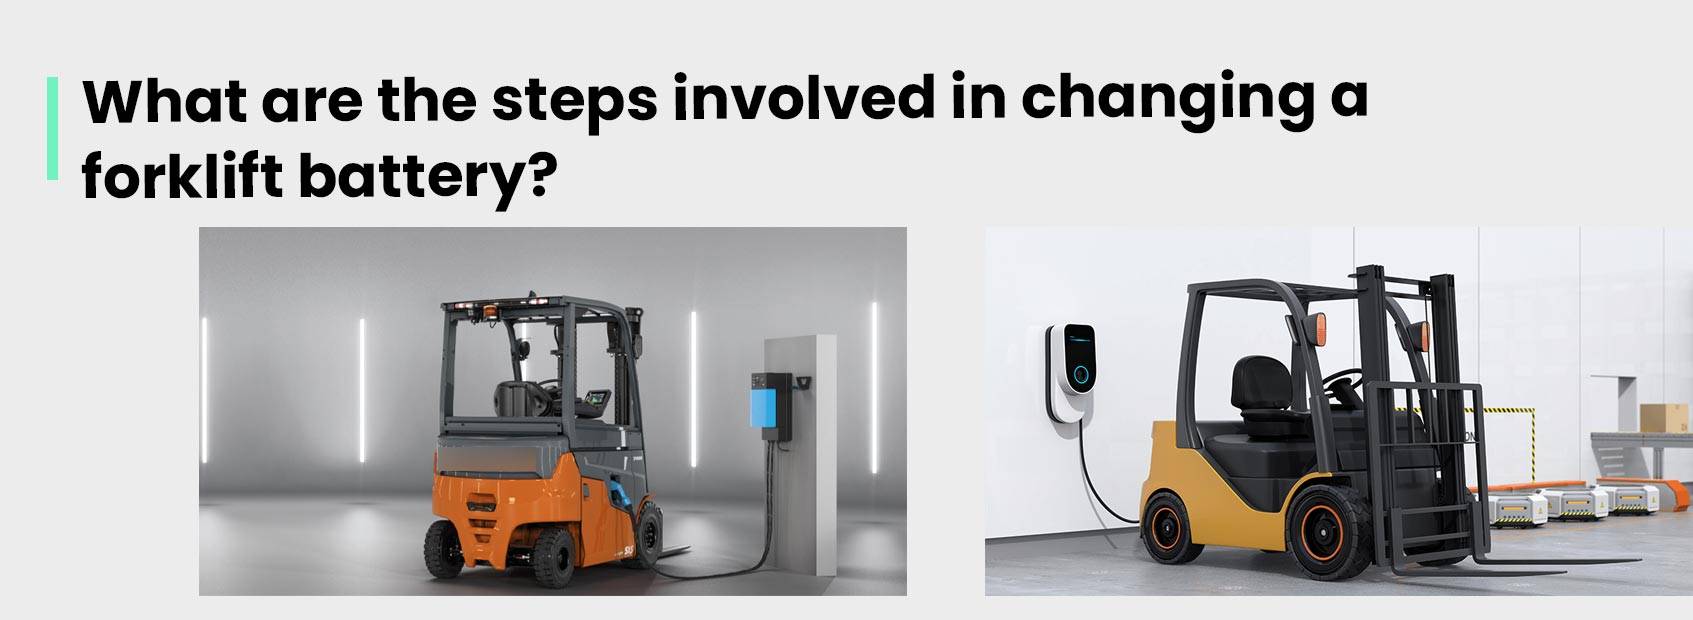 What are the steps involved in changing a forklift battery?